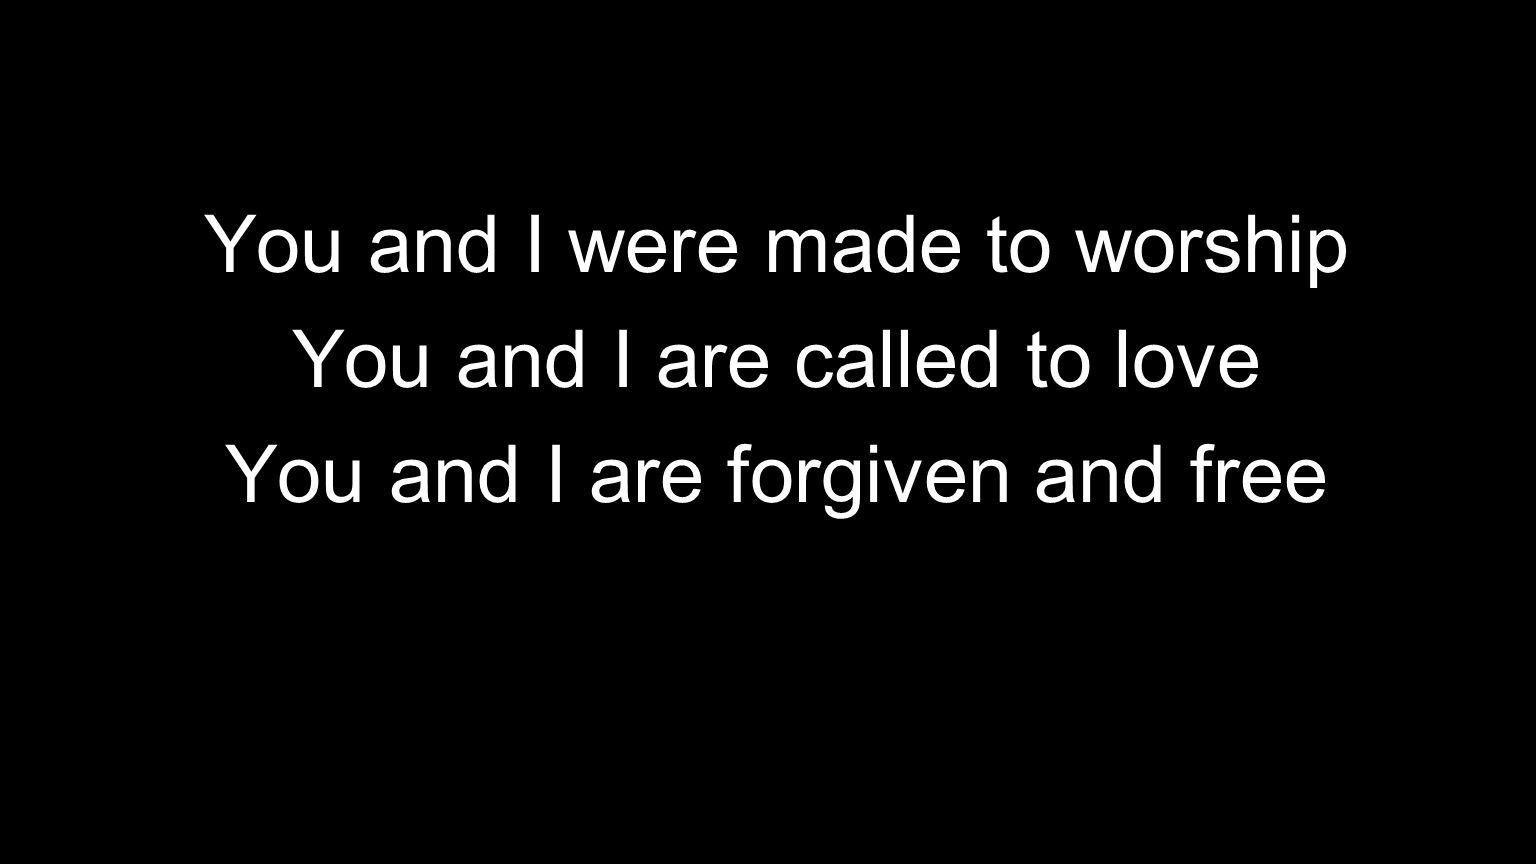 You and I were made to worship You and I are called to love You and I are forgiven and free